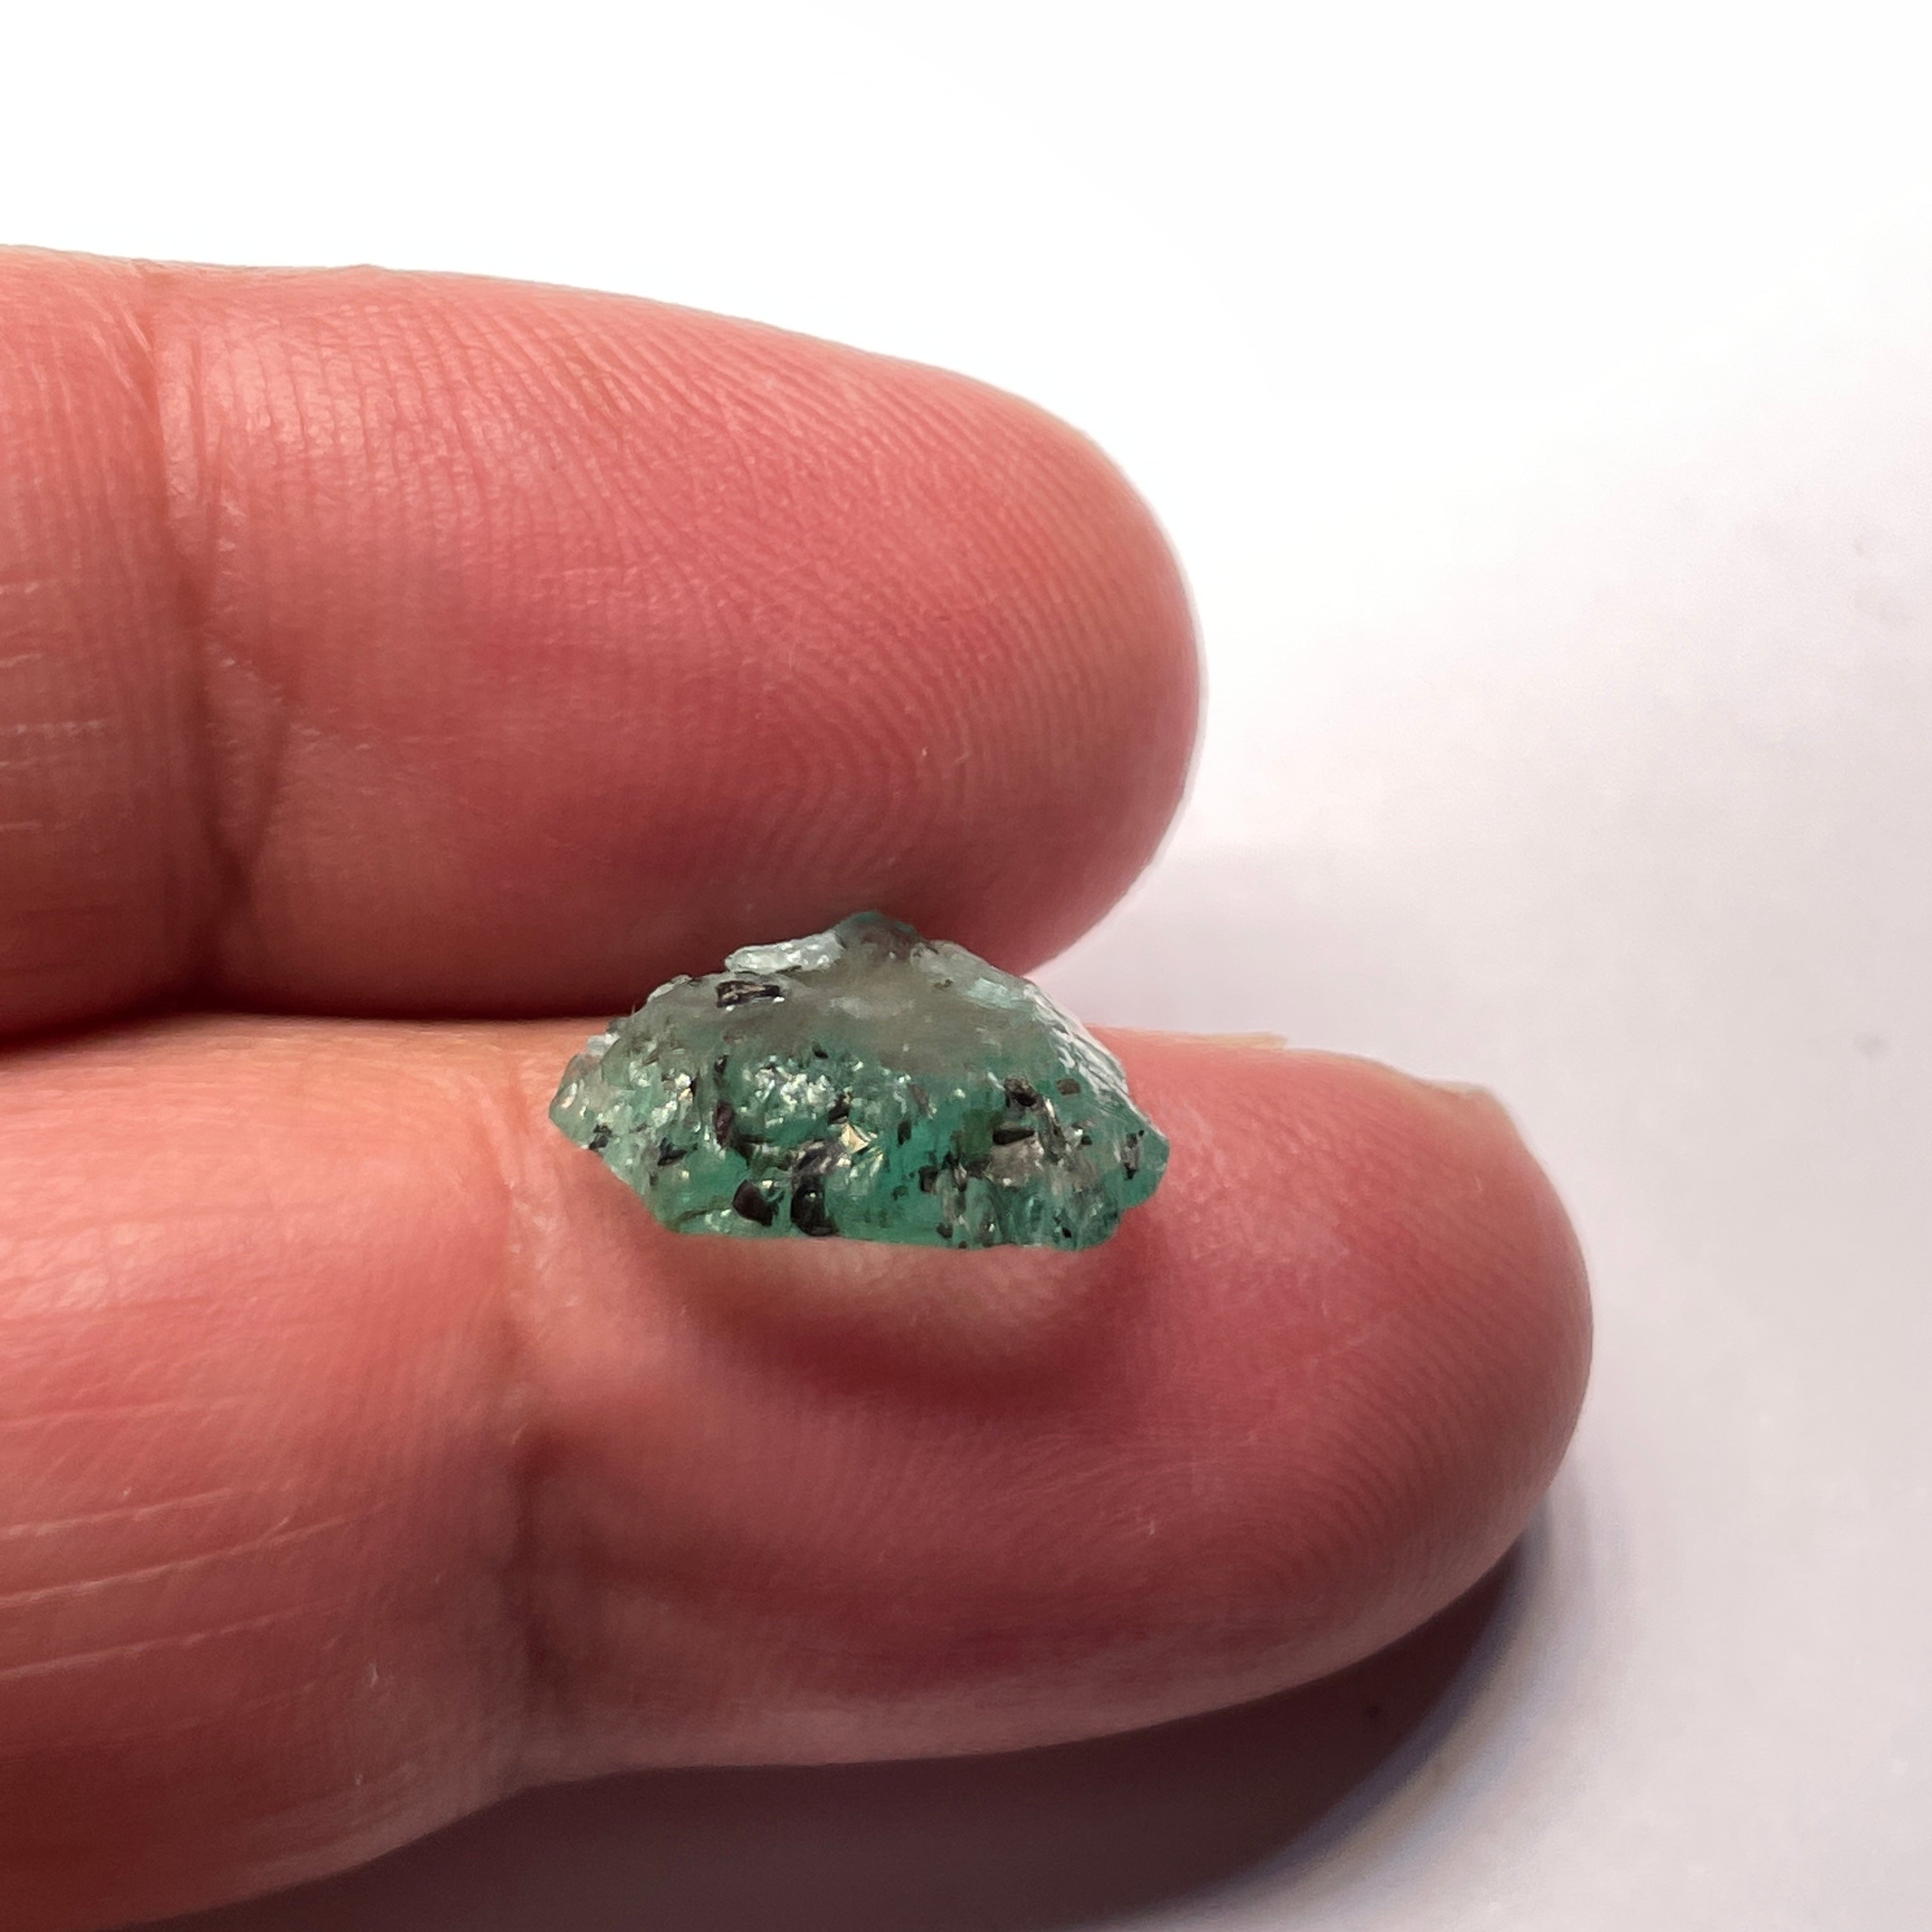 3.19Ct Emerald Tanzania Untreated Unheated No Oil Very Flat But Excellent For A Collection Or Set In